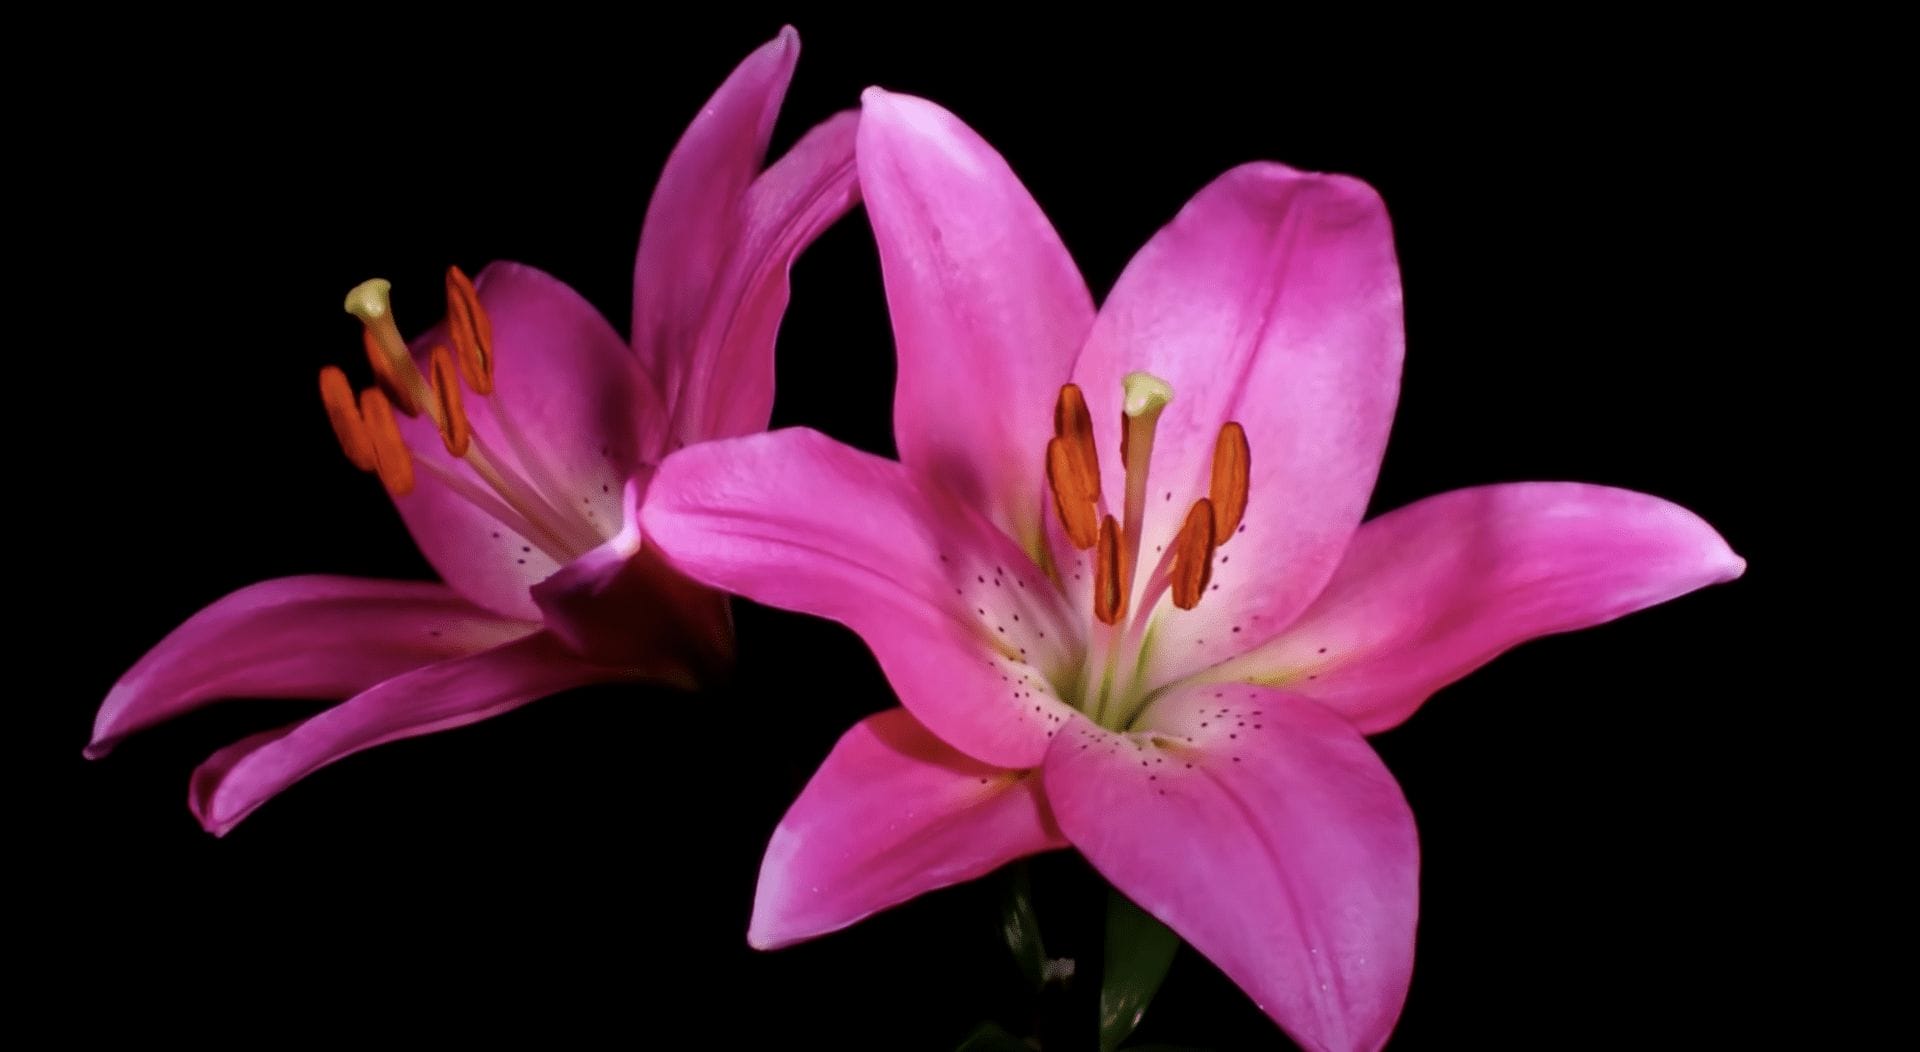 Watch these flower bloom time lapses for spring inspiration